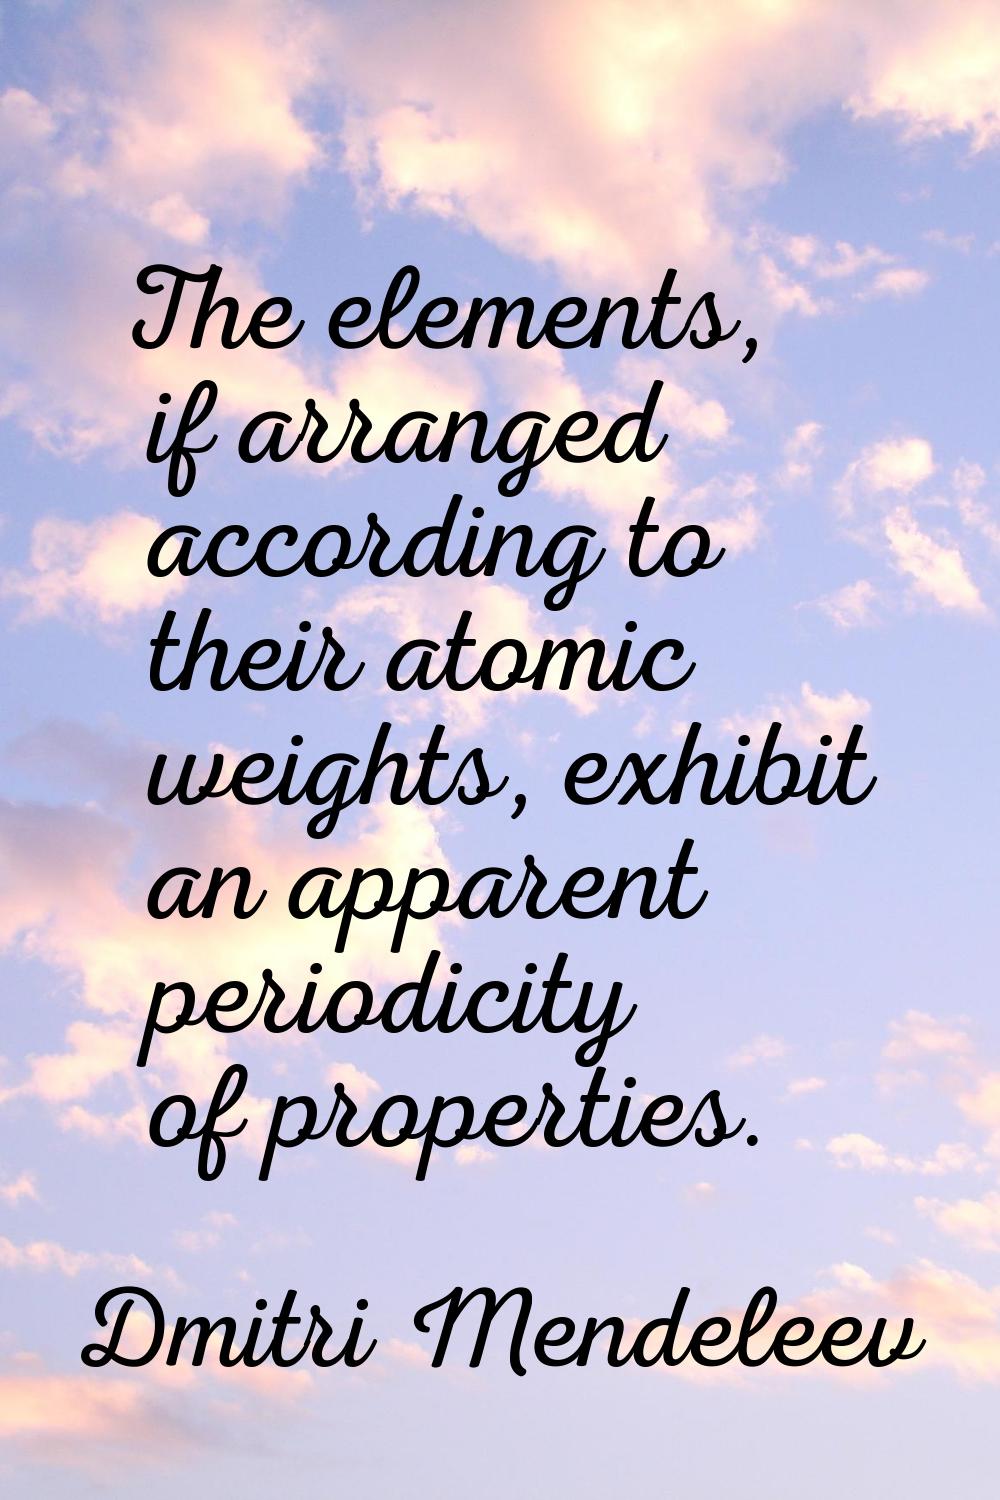 The elements, if arranged according to their atomic weights, exhibit an apparent periodicity of pro